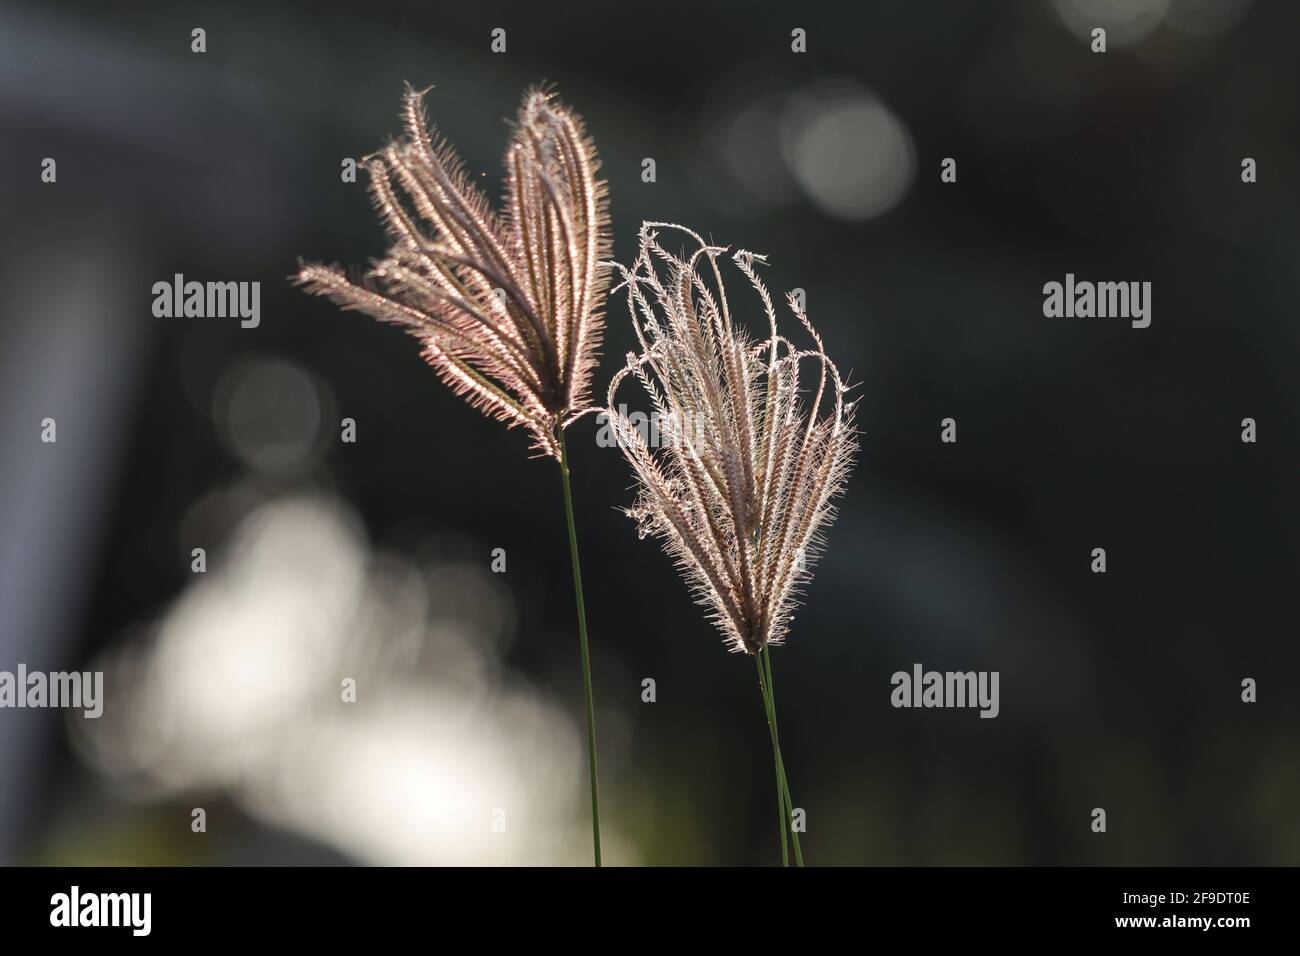 A beautiful closeup shot of two Chloris virgata (feather finger grass) with blurred background Stock Photo